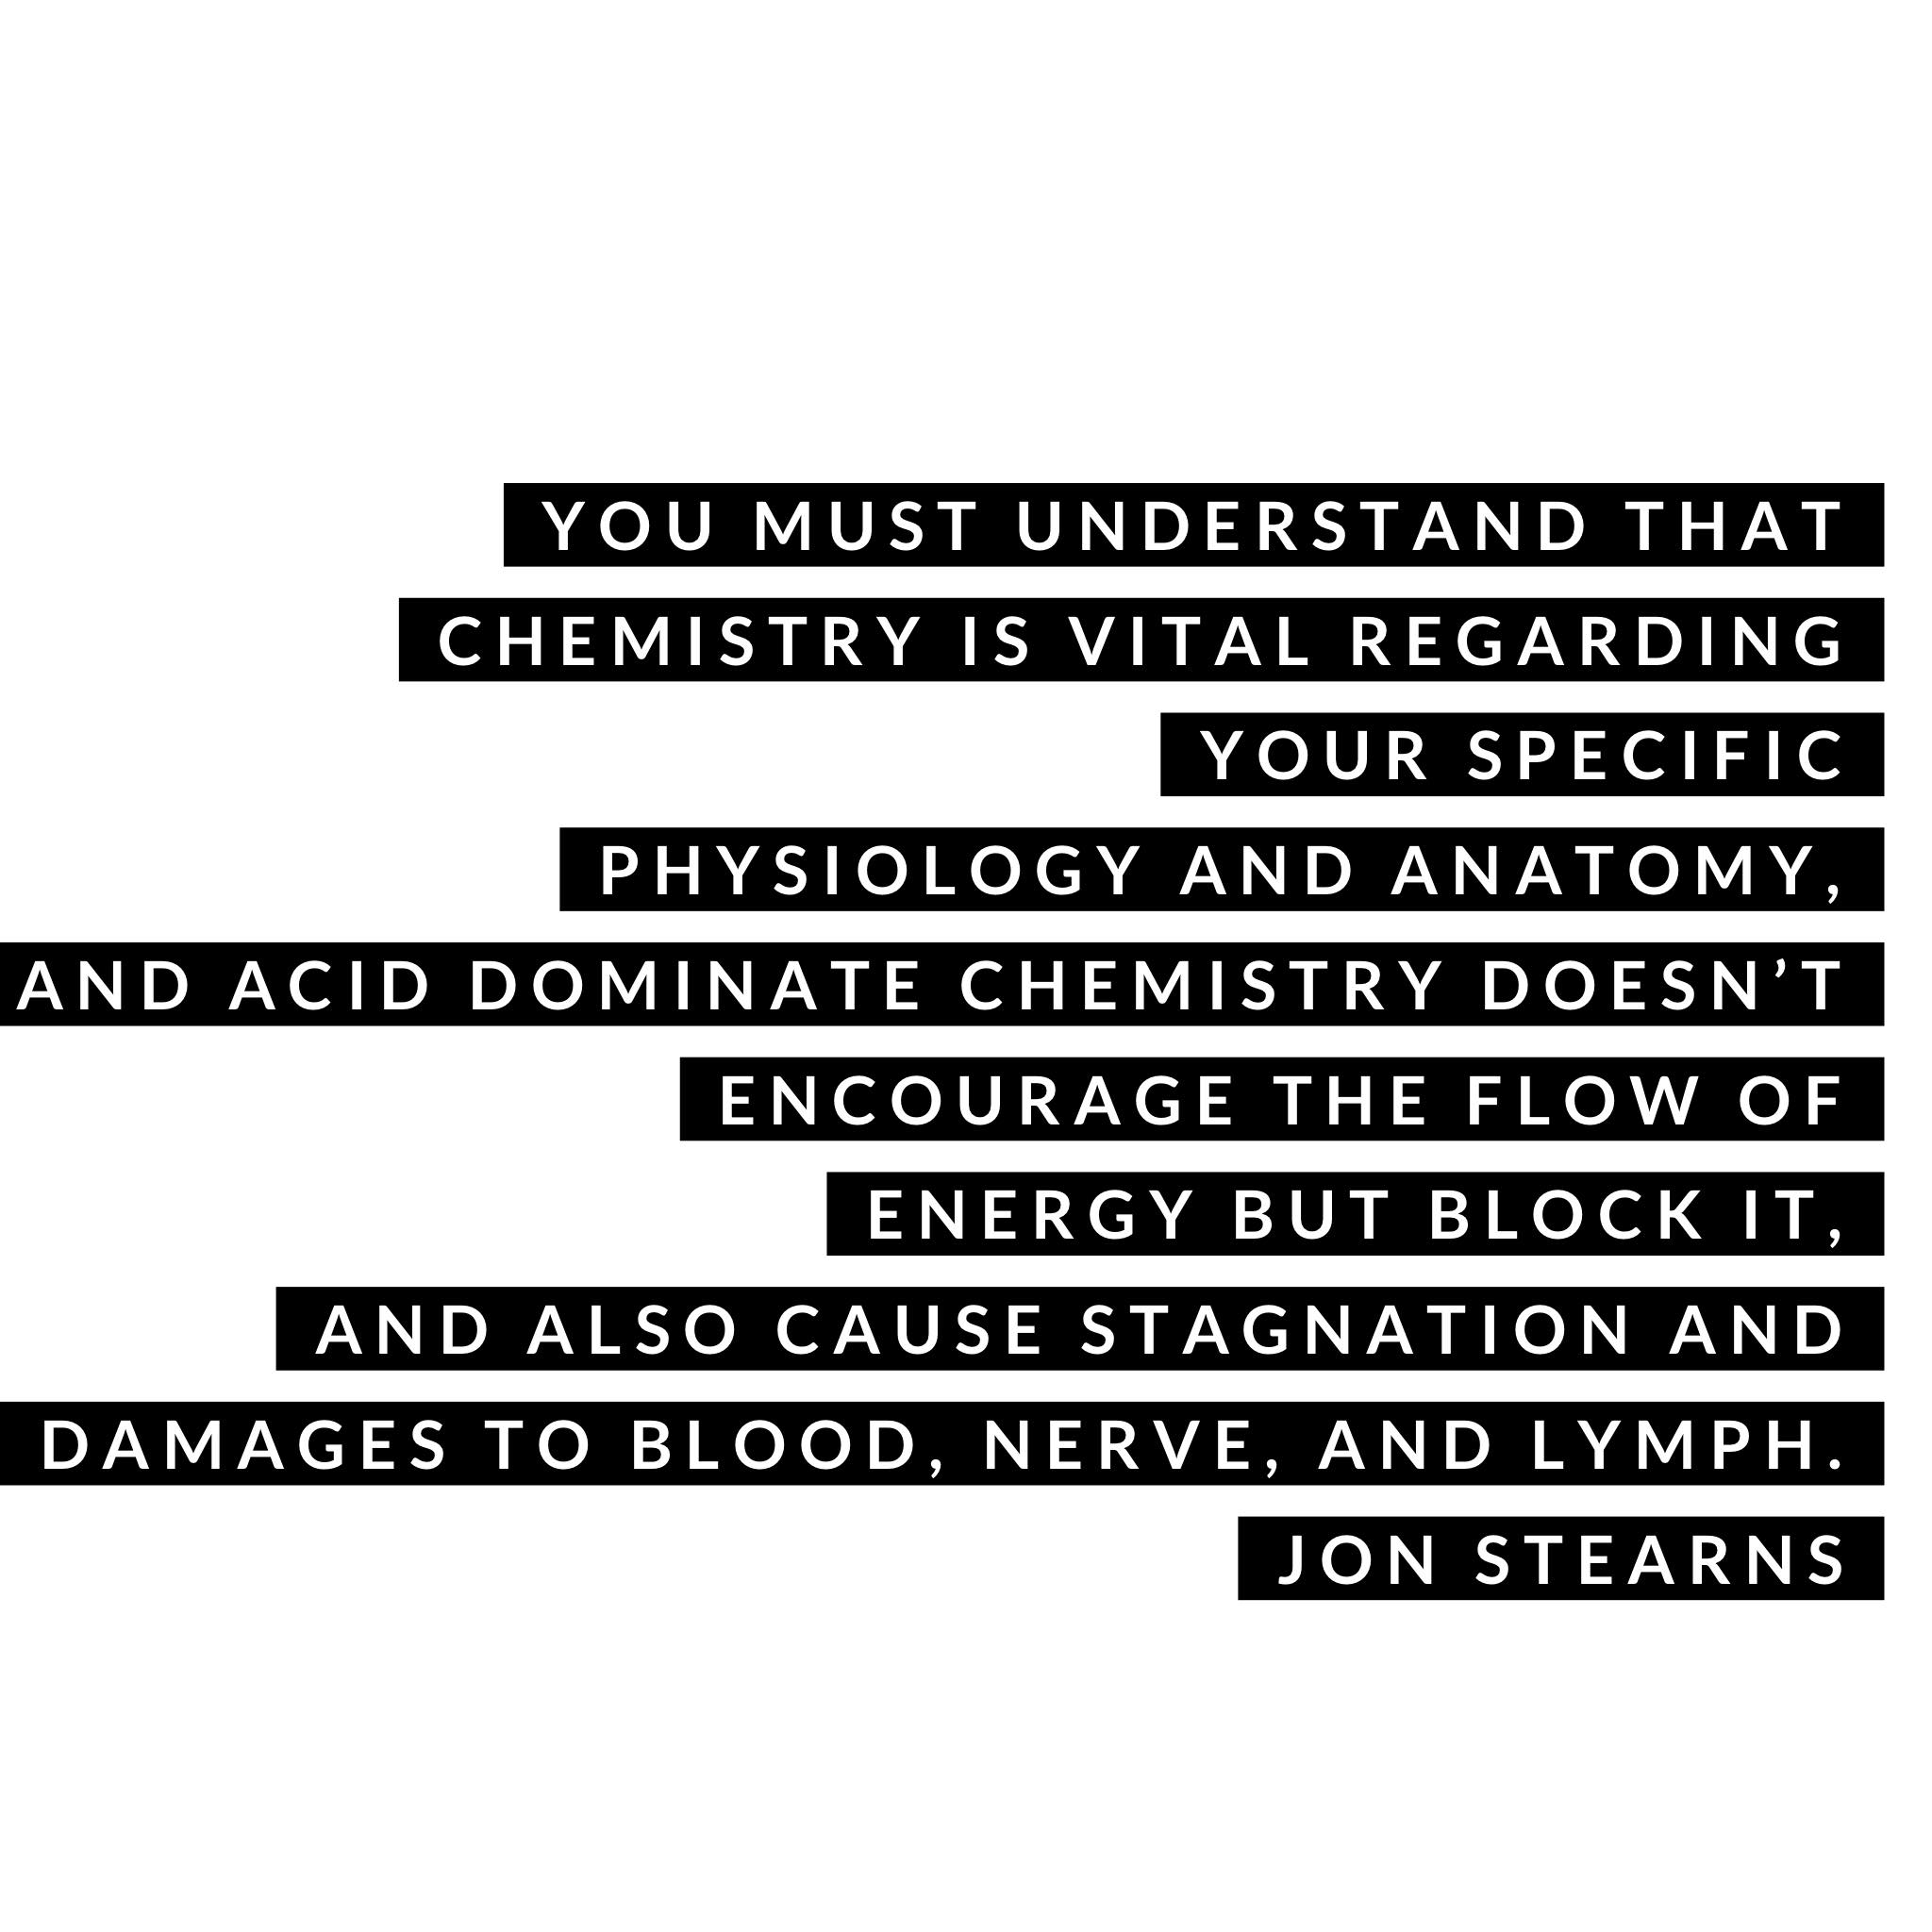 What obstructs and blocks the flow of energy of blood, nerve, and lymph? ACIDS!